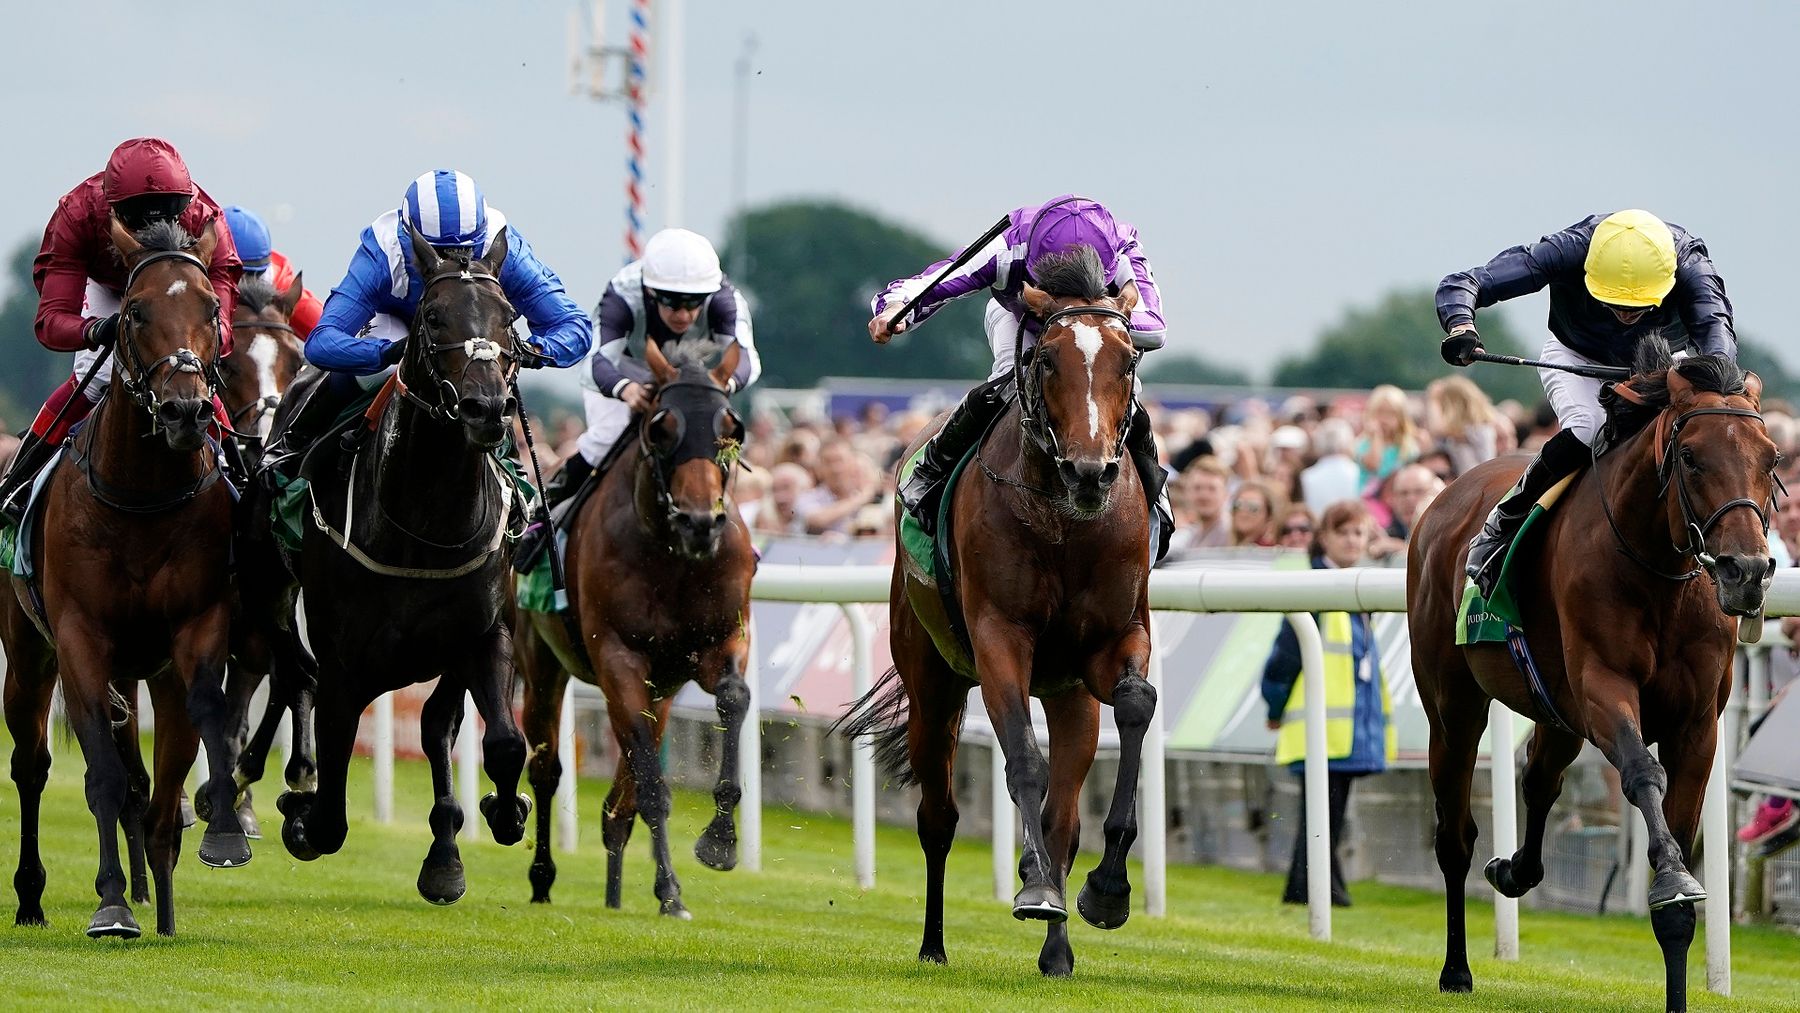 Juddmonte International preview Who will win Wednesday's big race?